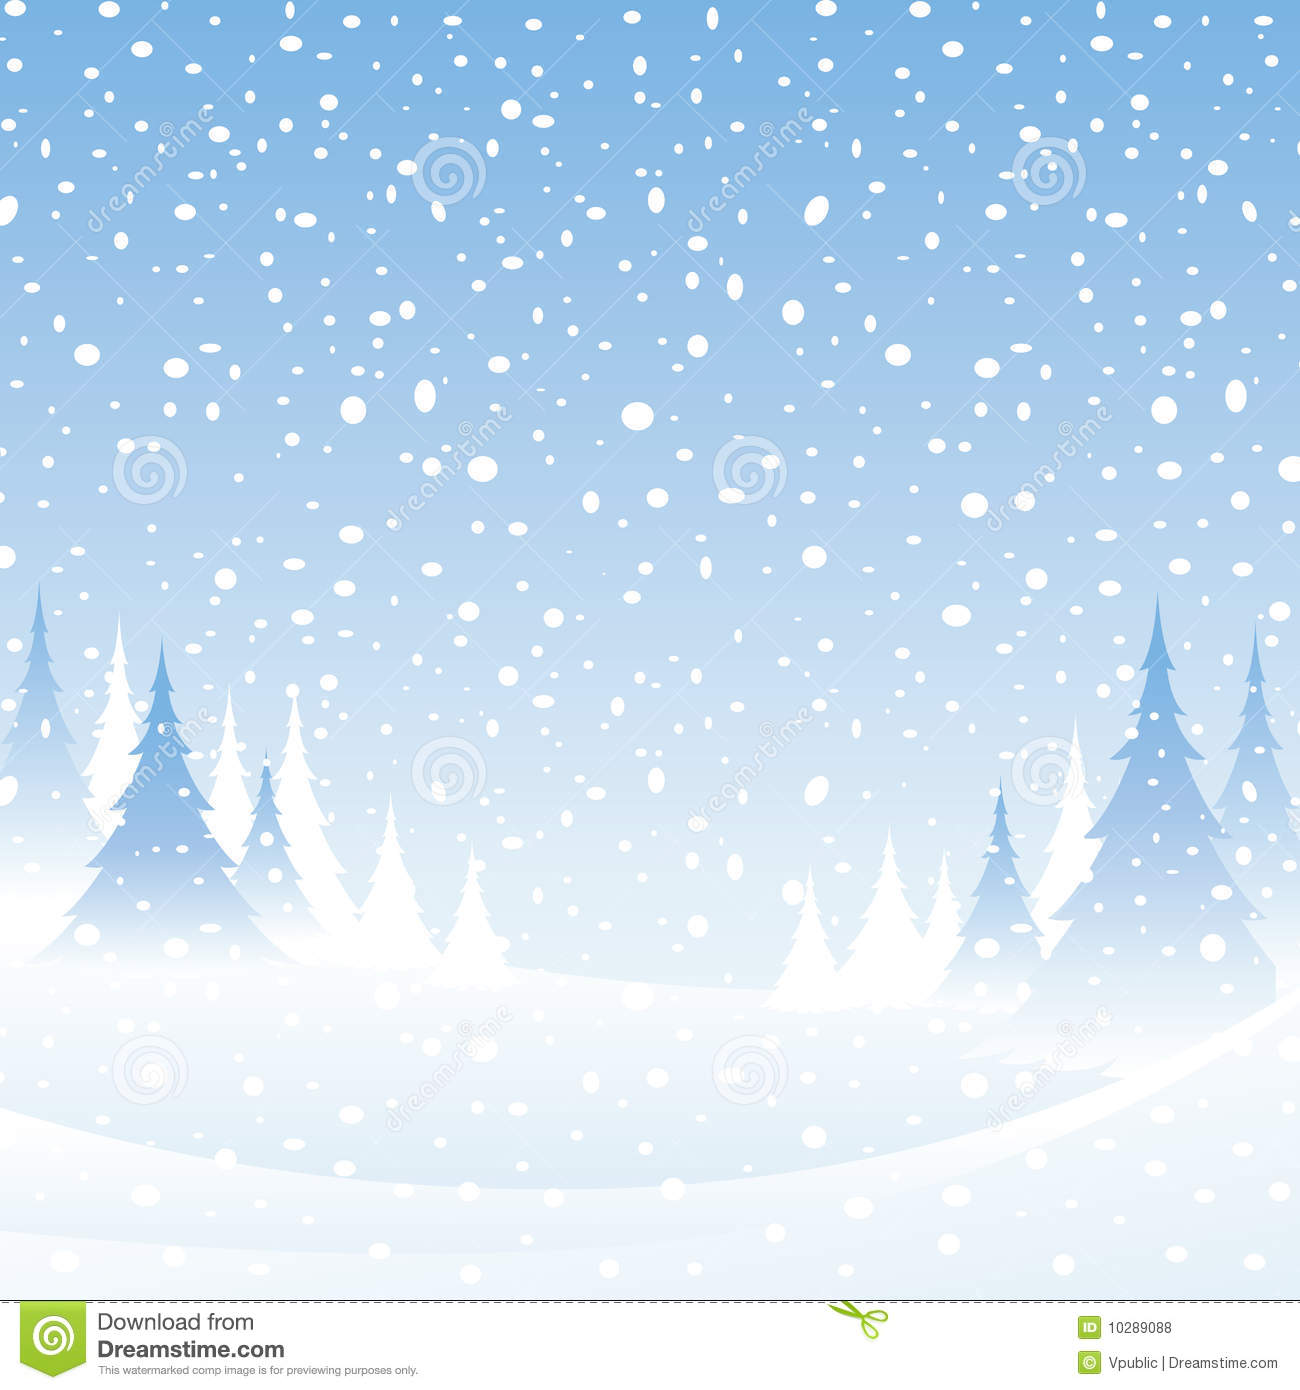 Scenes Clip Art Displaying 16 Images For Snow Scenes Clip Art Toolbar